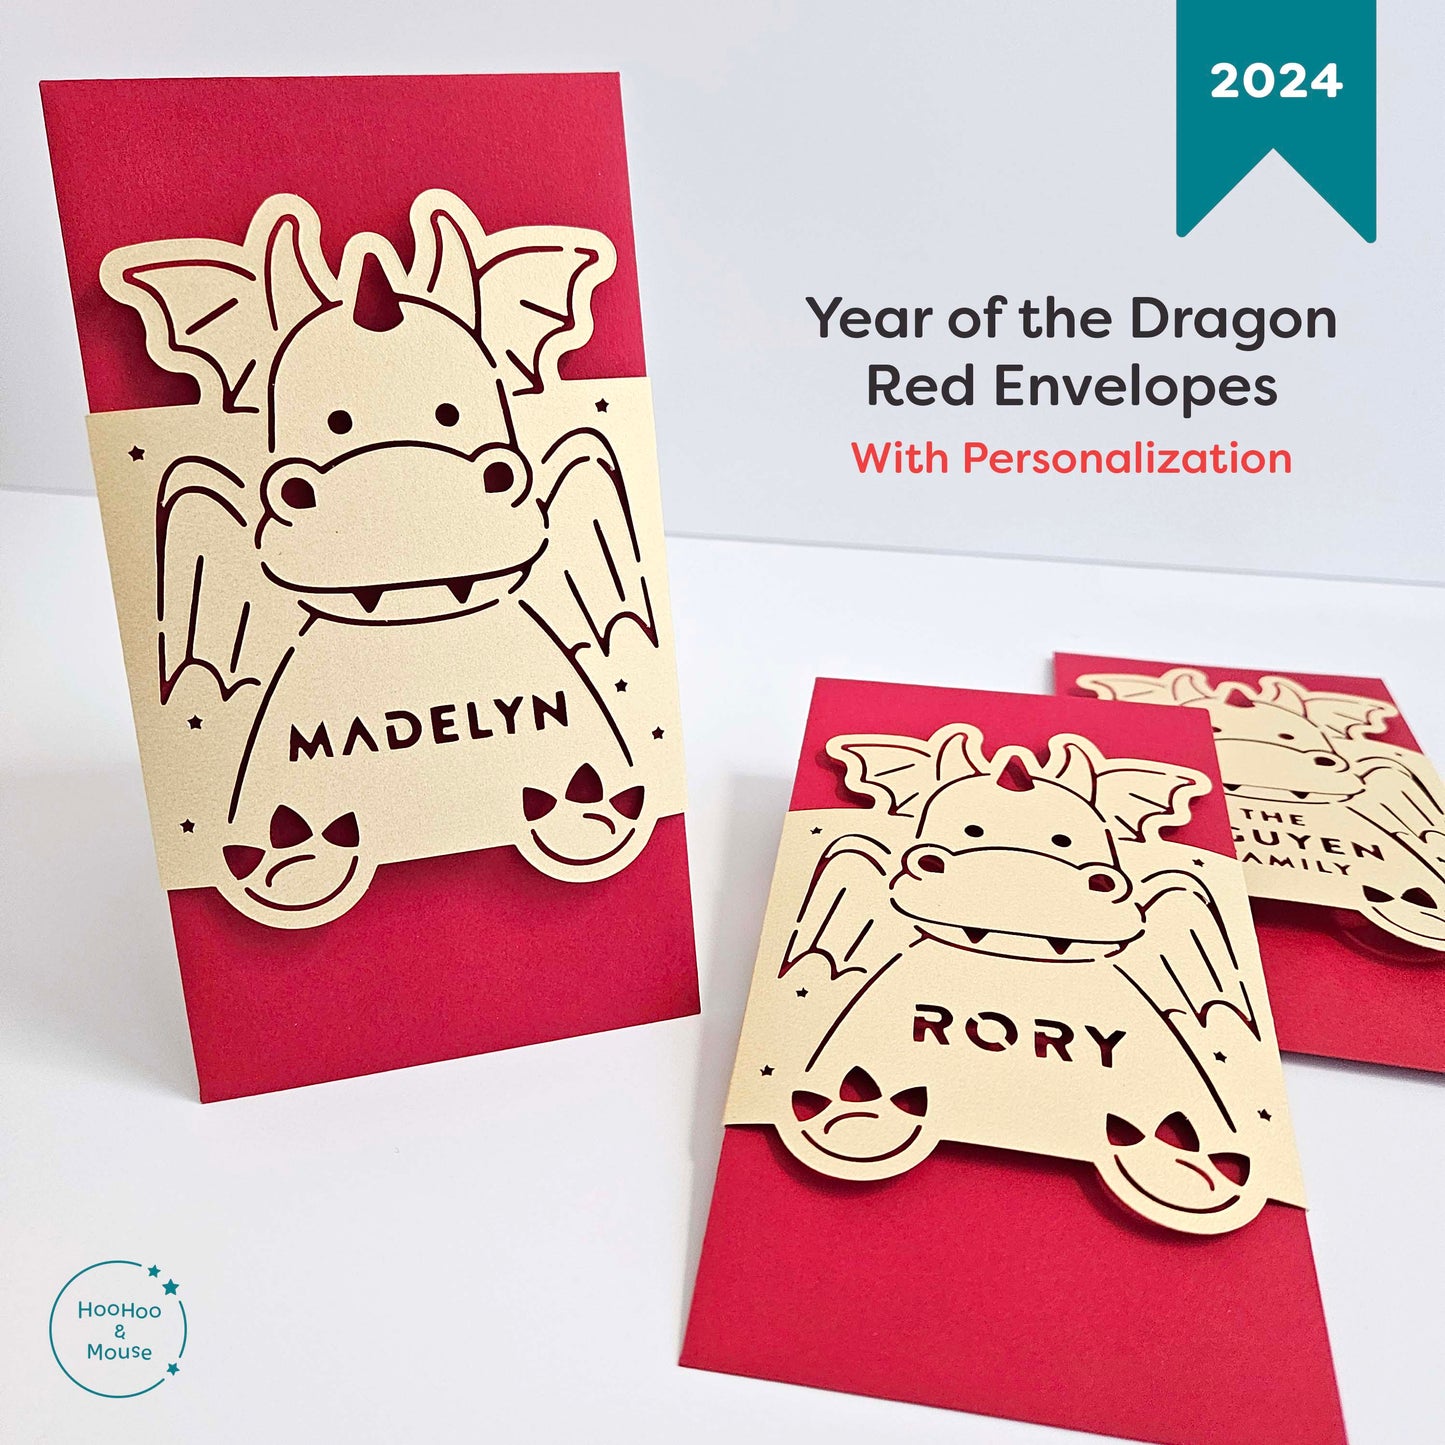 2024 Year of the Dragon Red Envelope, personalized